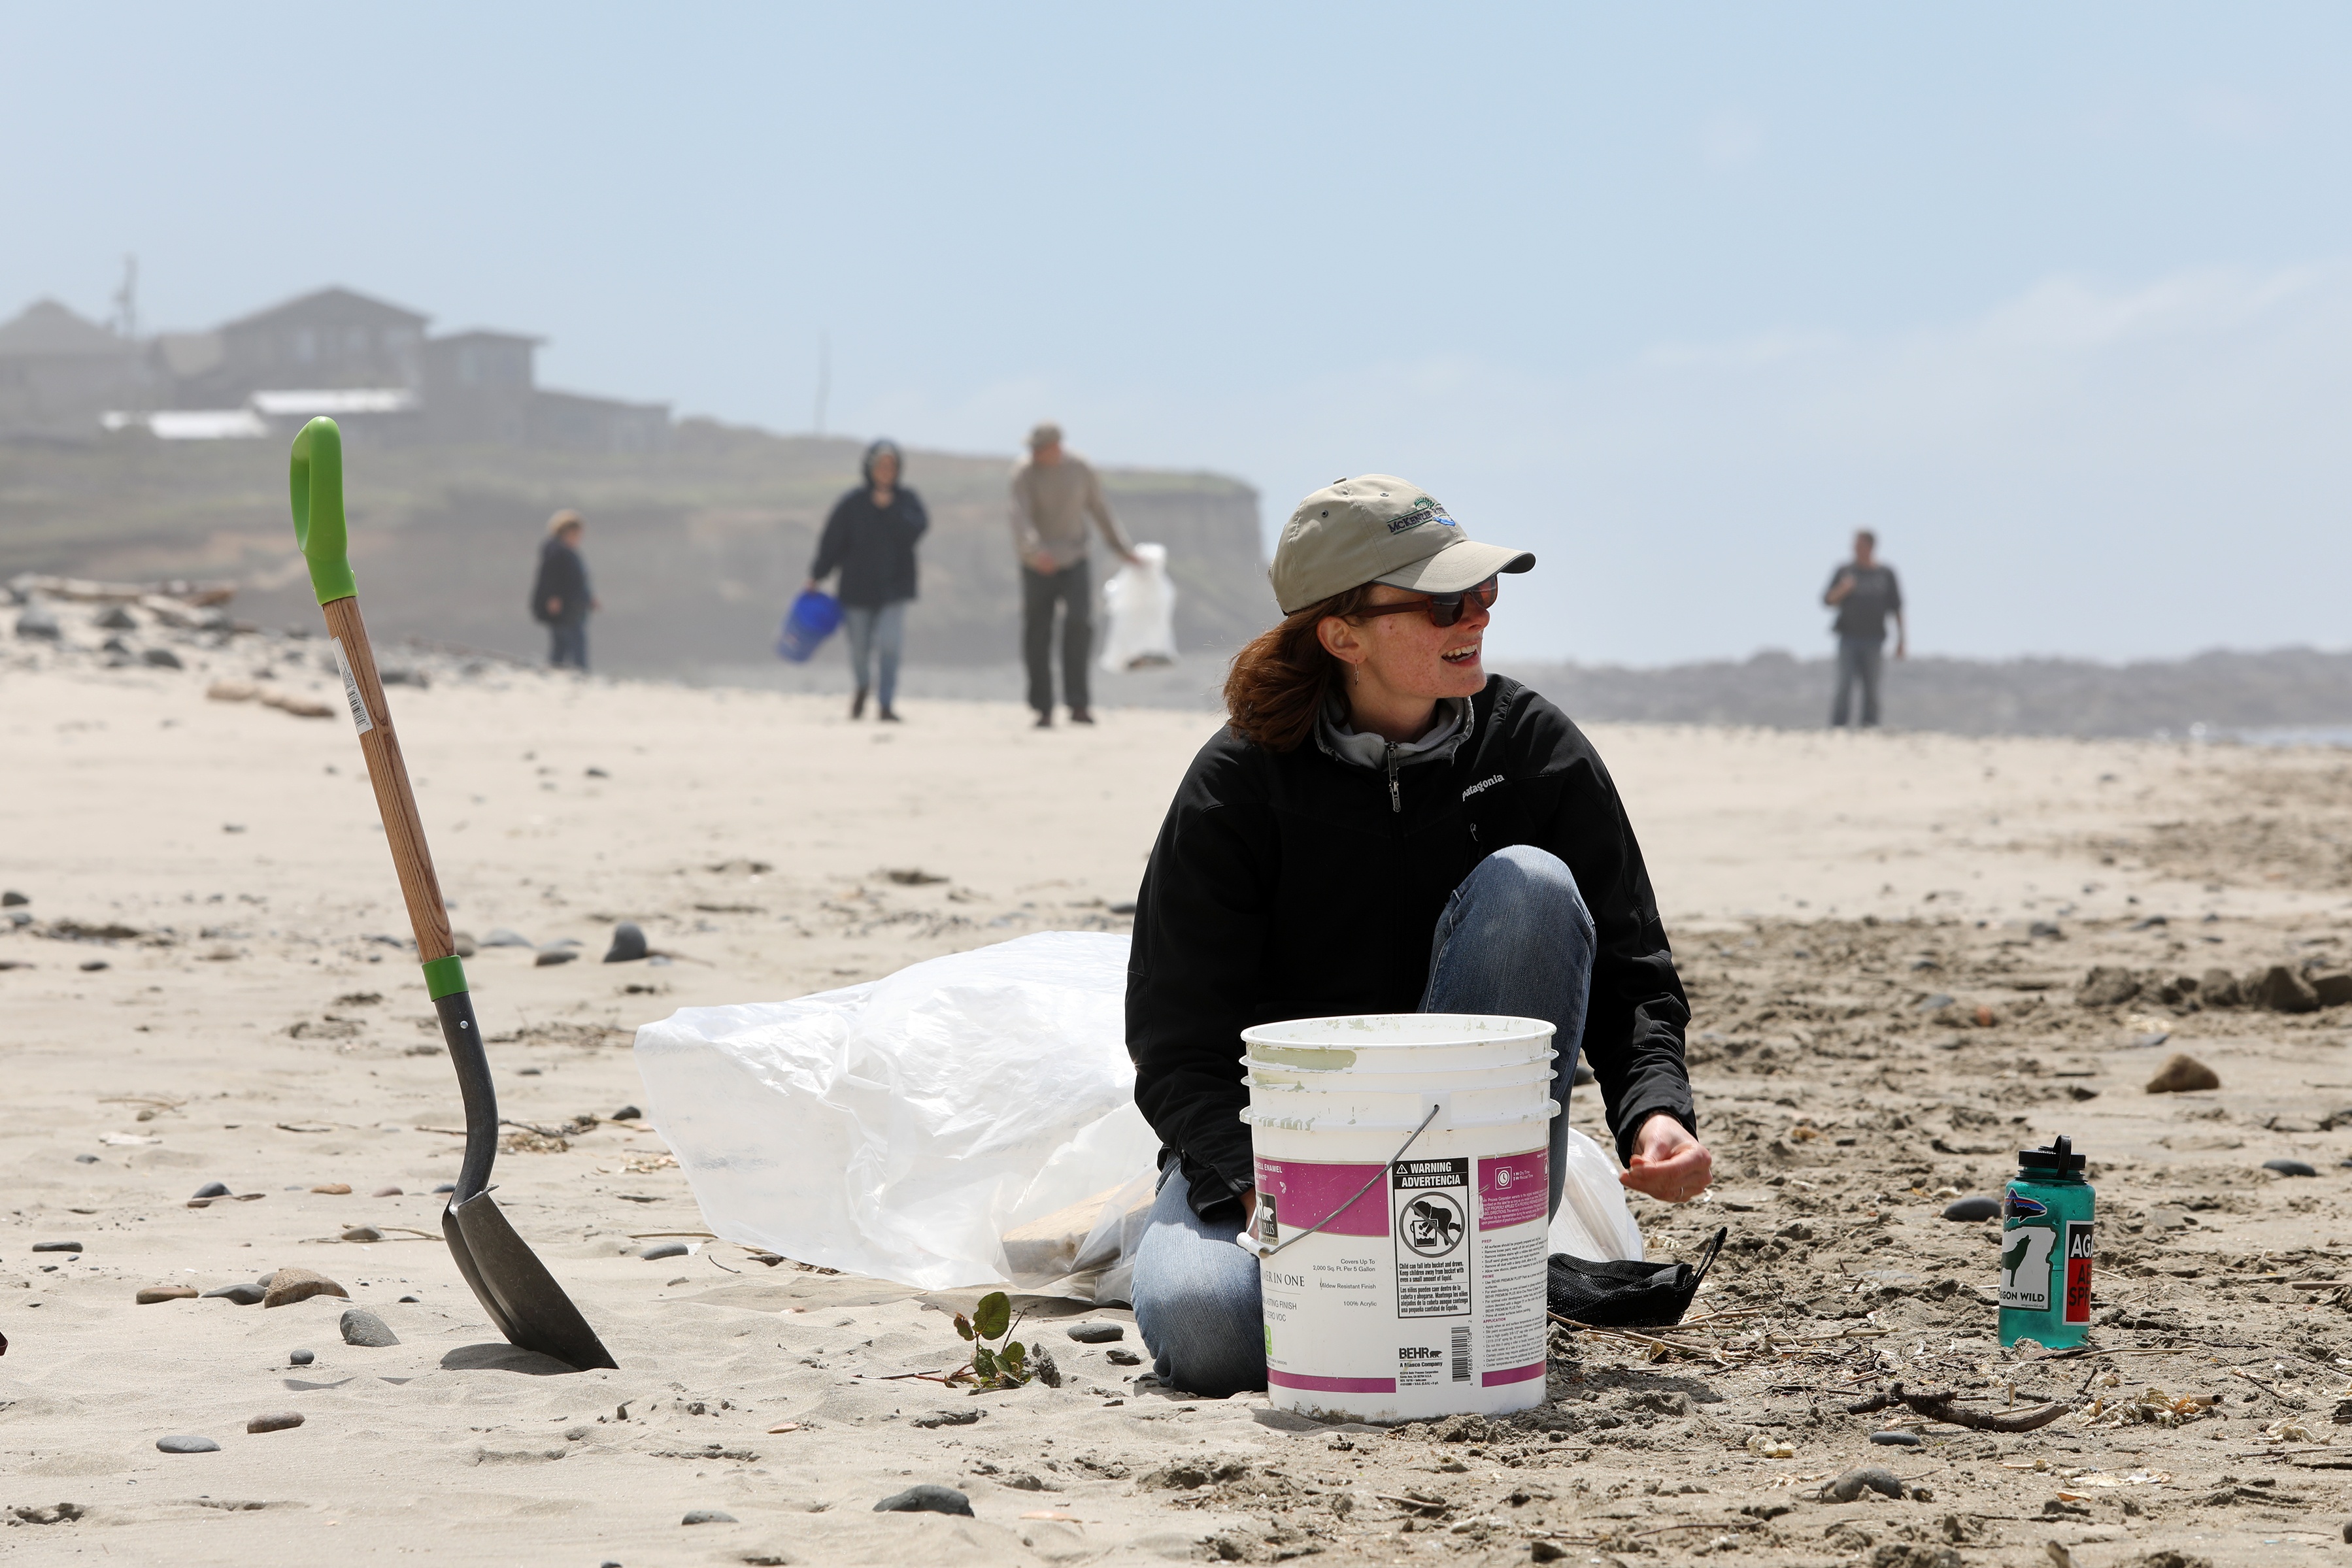 Woman on beach cleaning up trash with volunteer team